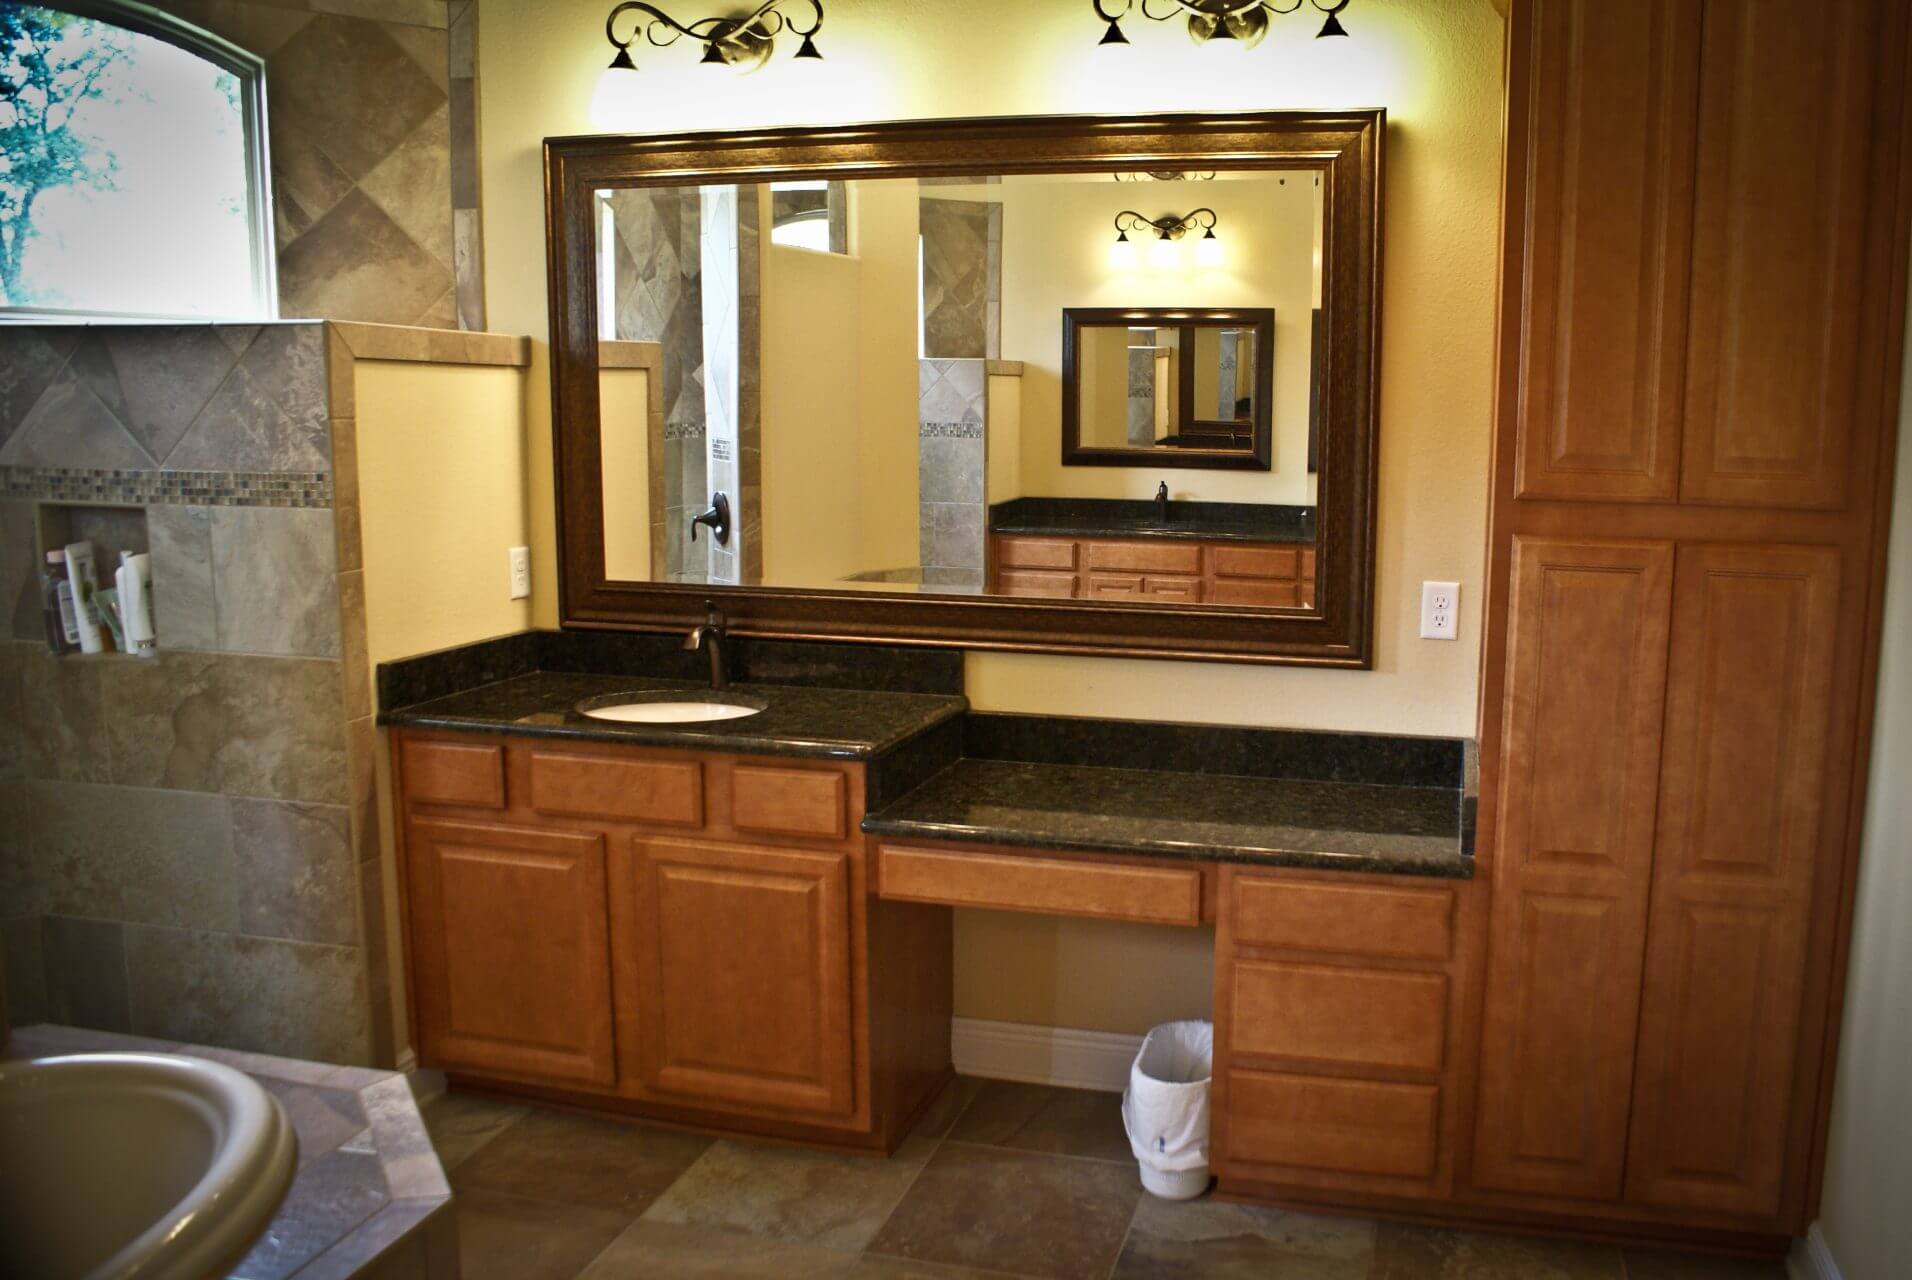 Master bathroom sink and vanity with granite countertops and modern wood cabinets